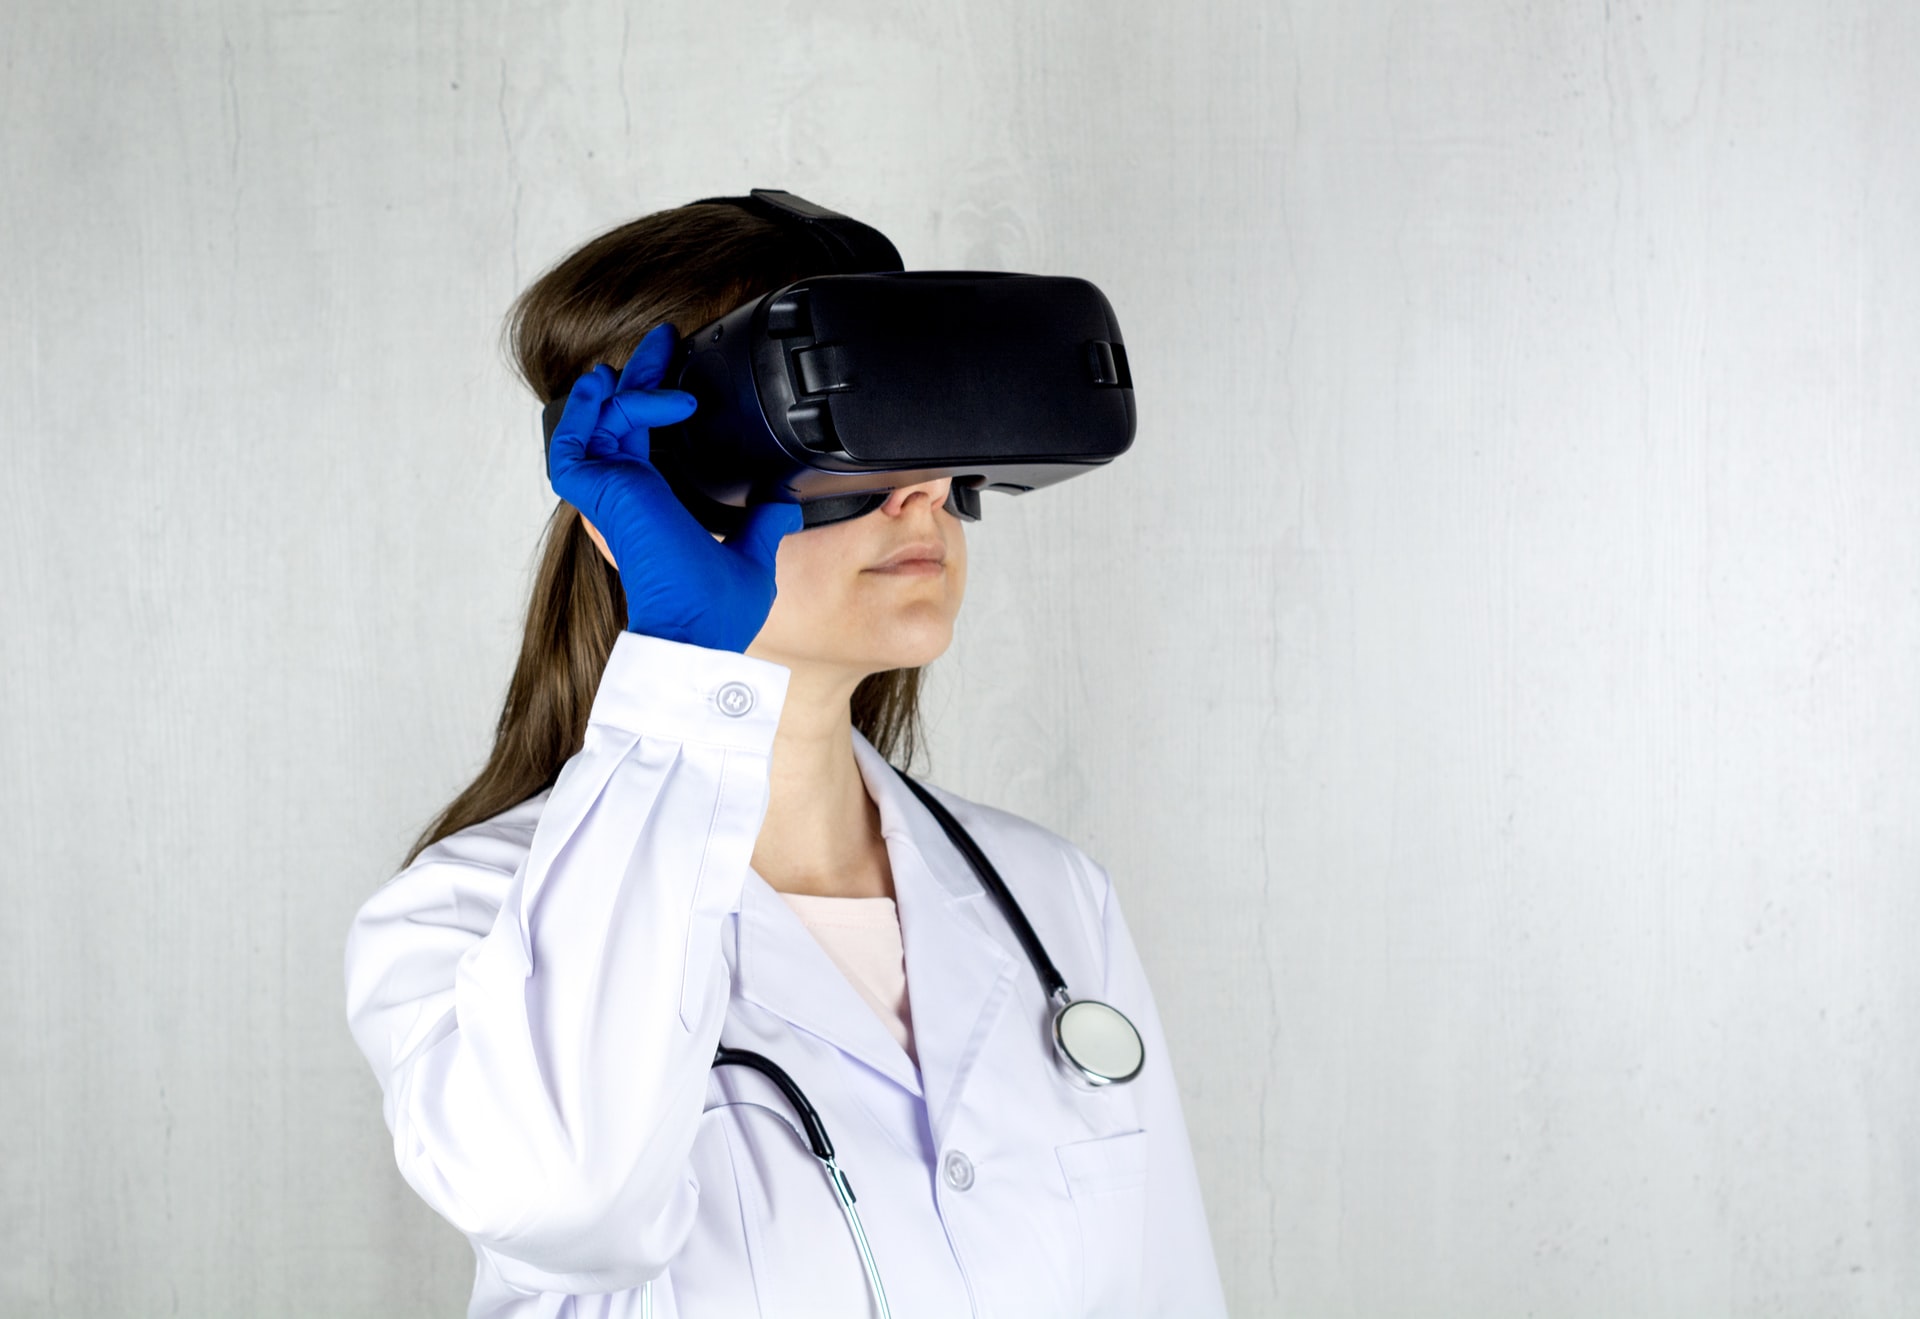 Apollo Hospitals Partners with 8chili to Deploy VR for Enhancing Patient Engagement